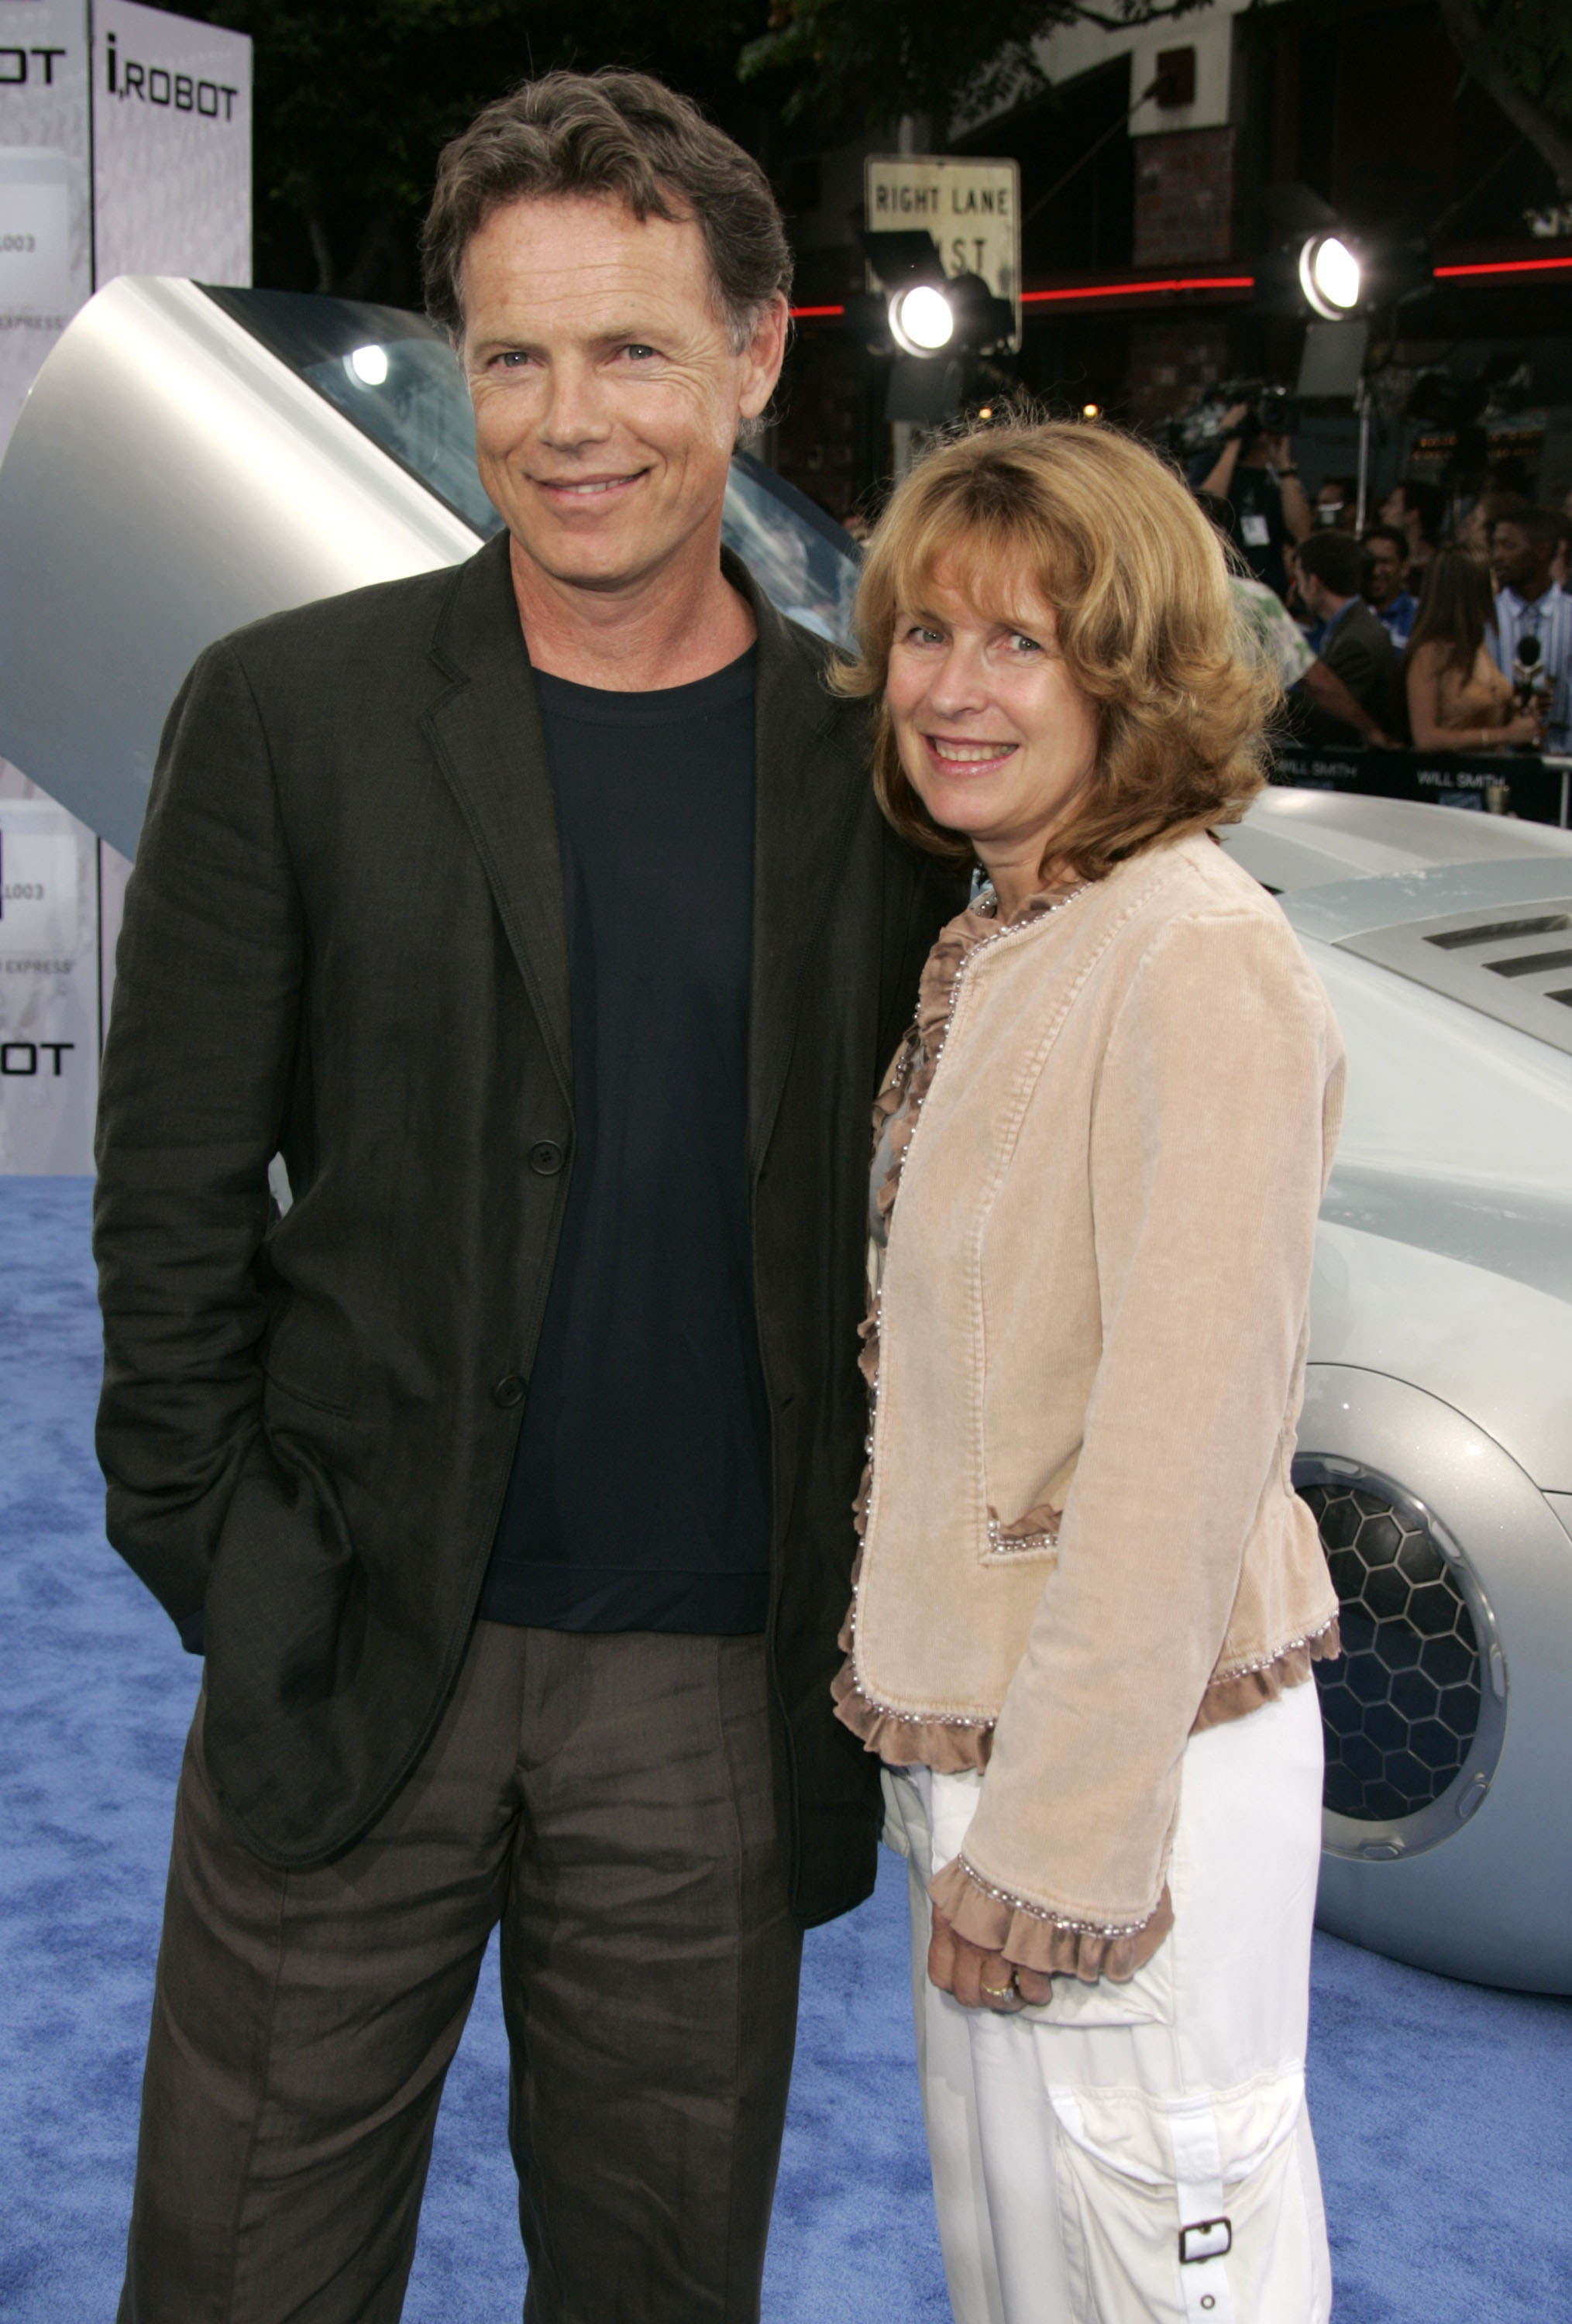 Bruce Greenwood and Susan Devlin at the premiere of "I, ROBOT" on July 7, 2004, in Westwood, California. | Source: Getty Images